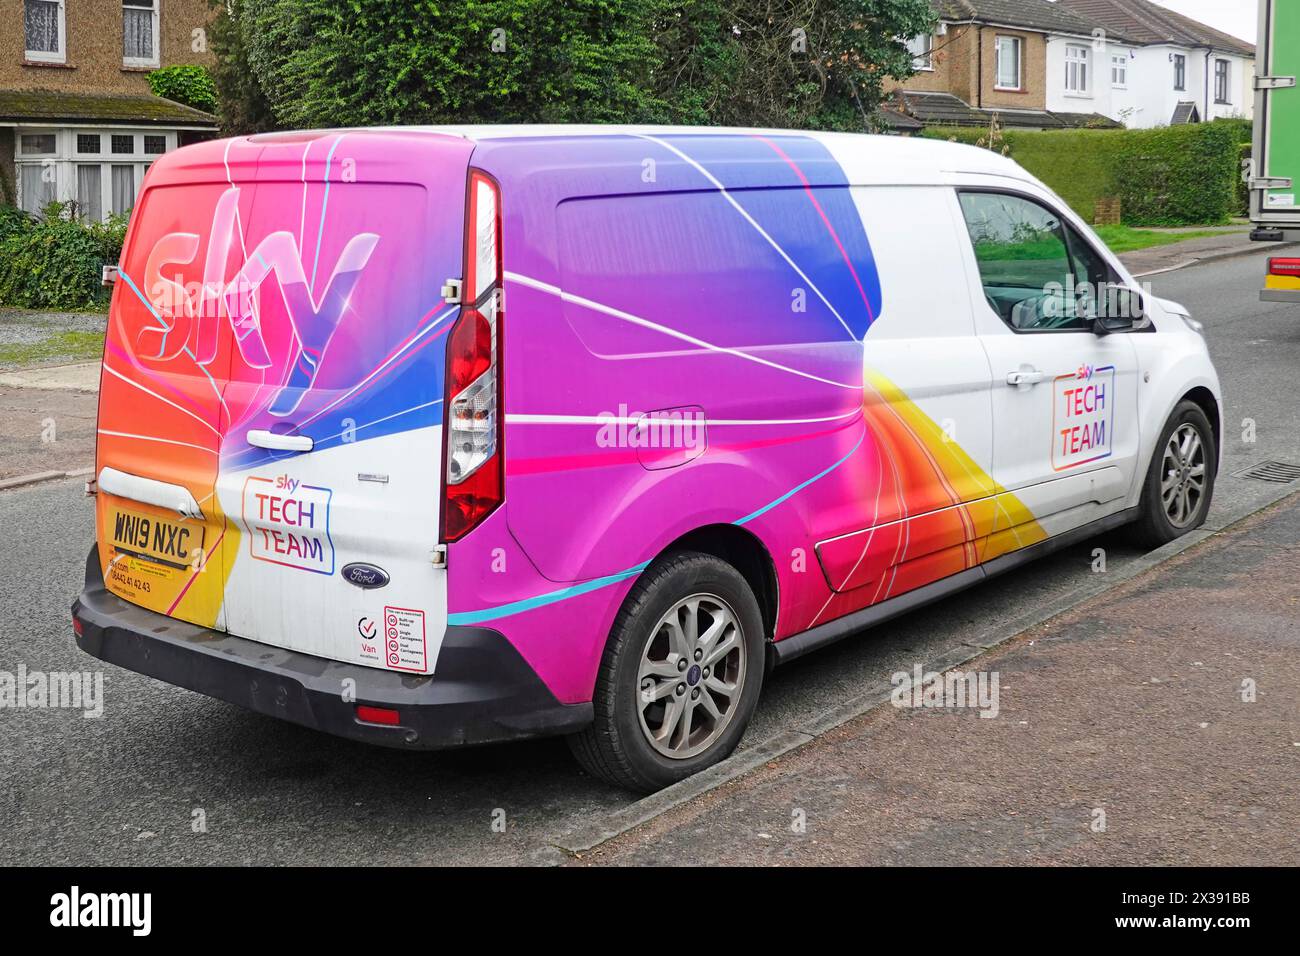 Sky Television Tech Team Ford van eye catching colourful graphics side & back view parked outside homes residential street Brentwood Essex England UK Stock Photo